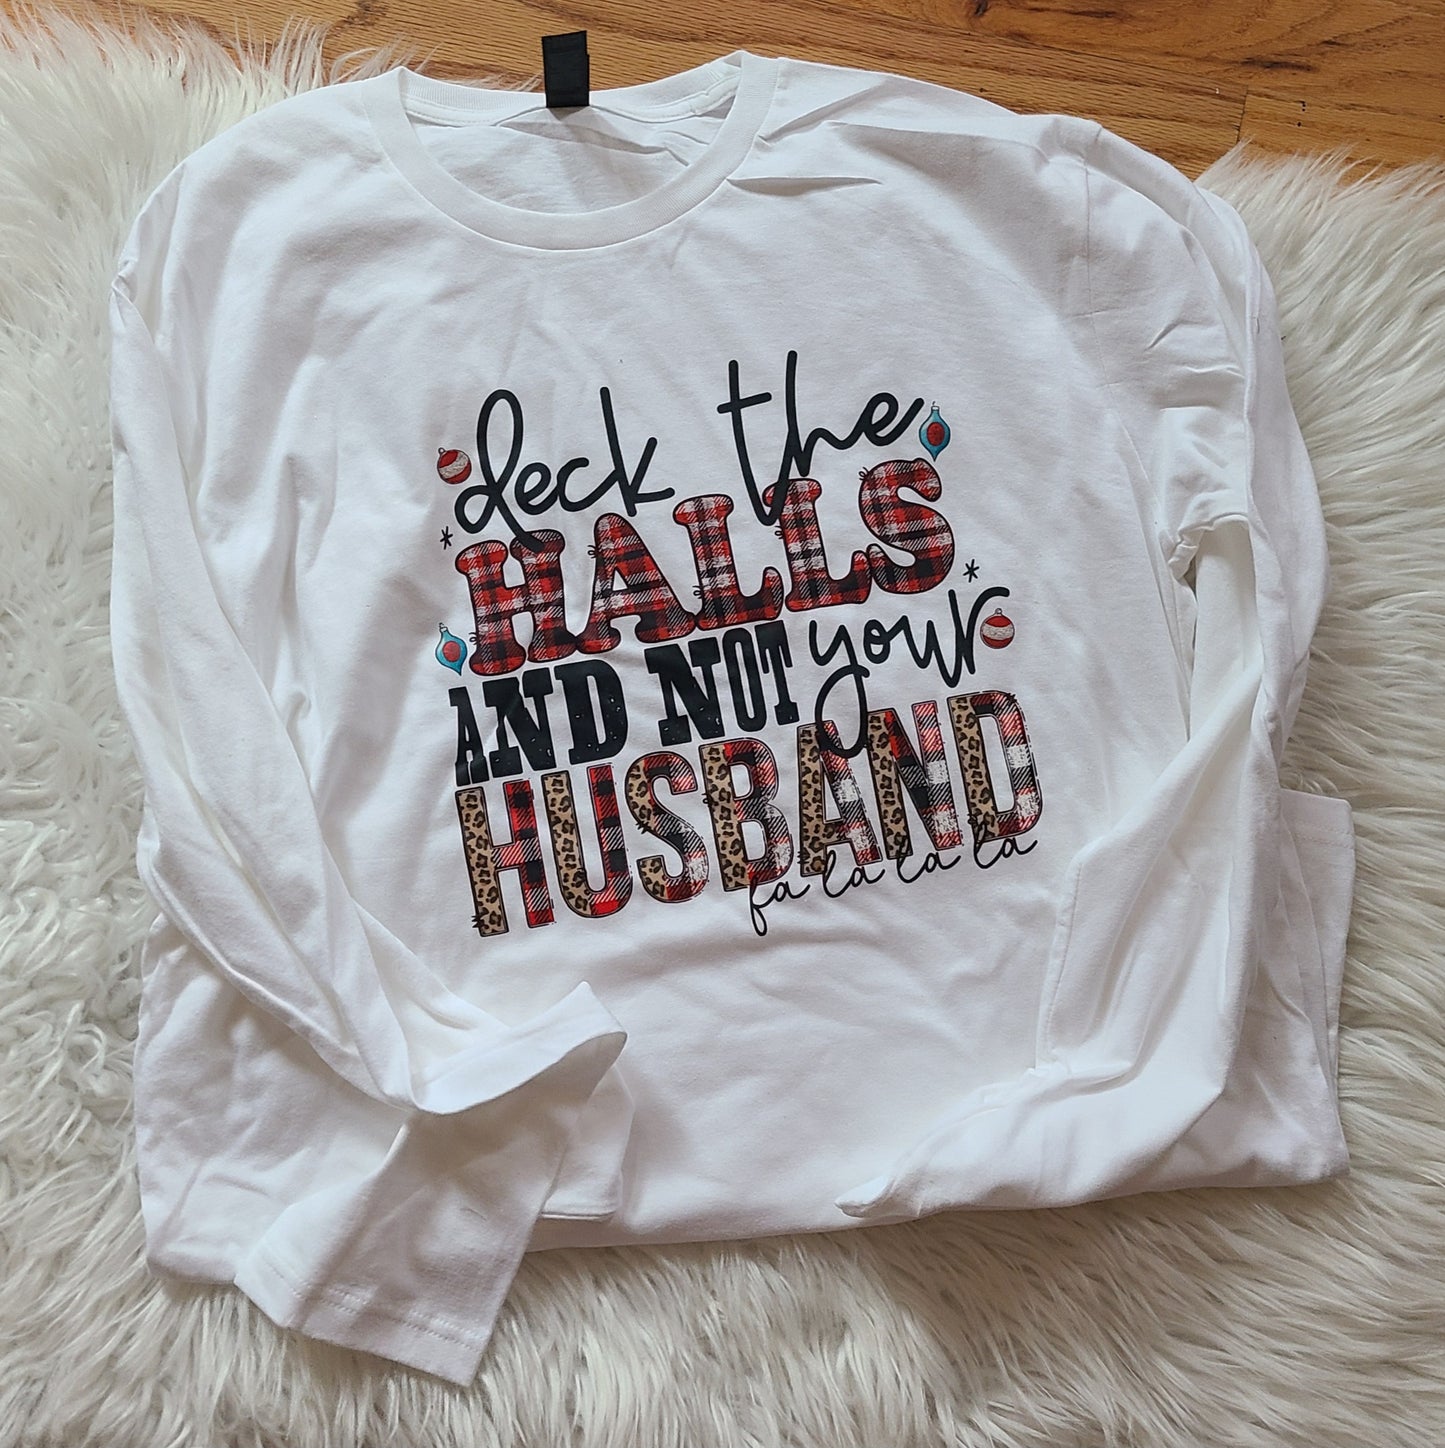 Deck the halls and not your husband